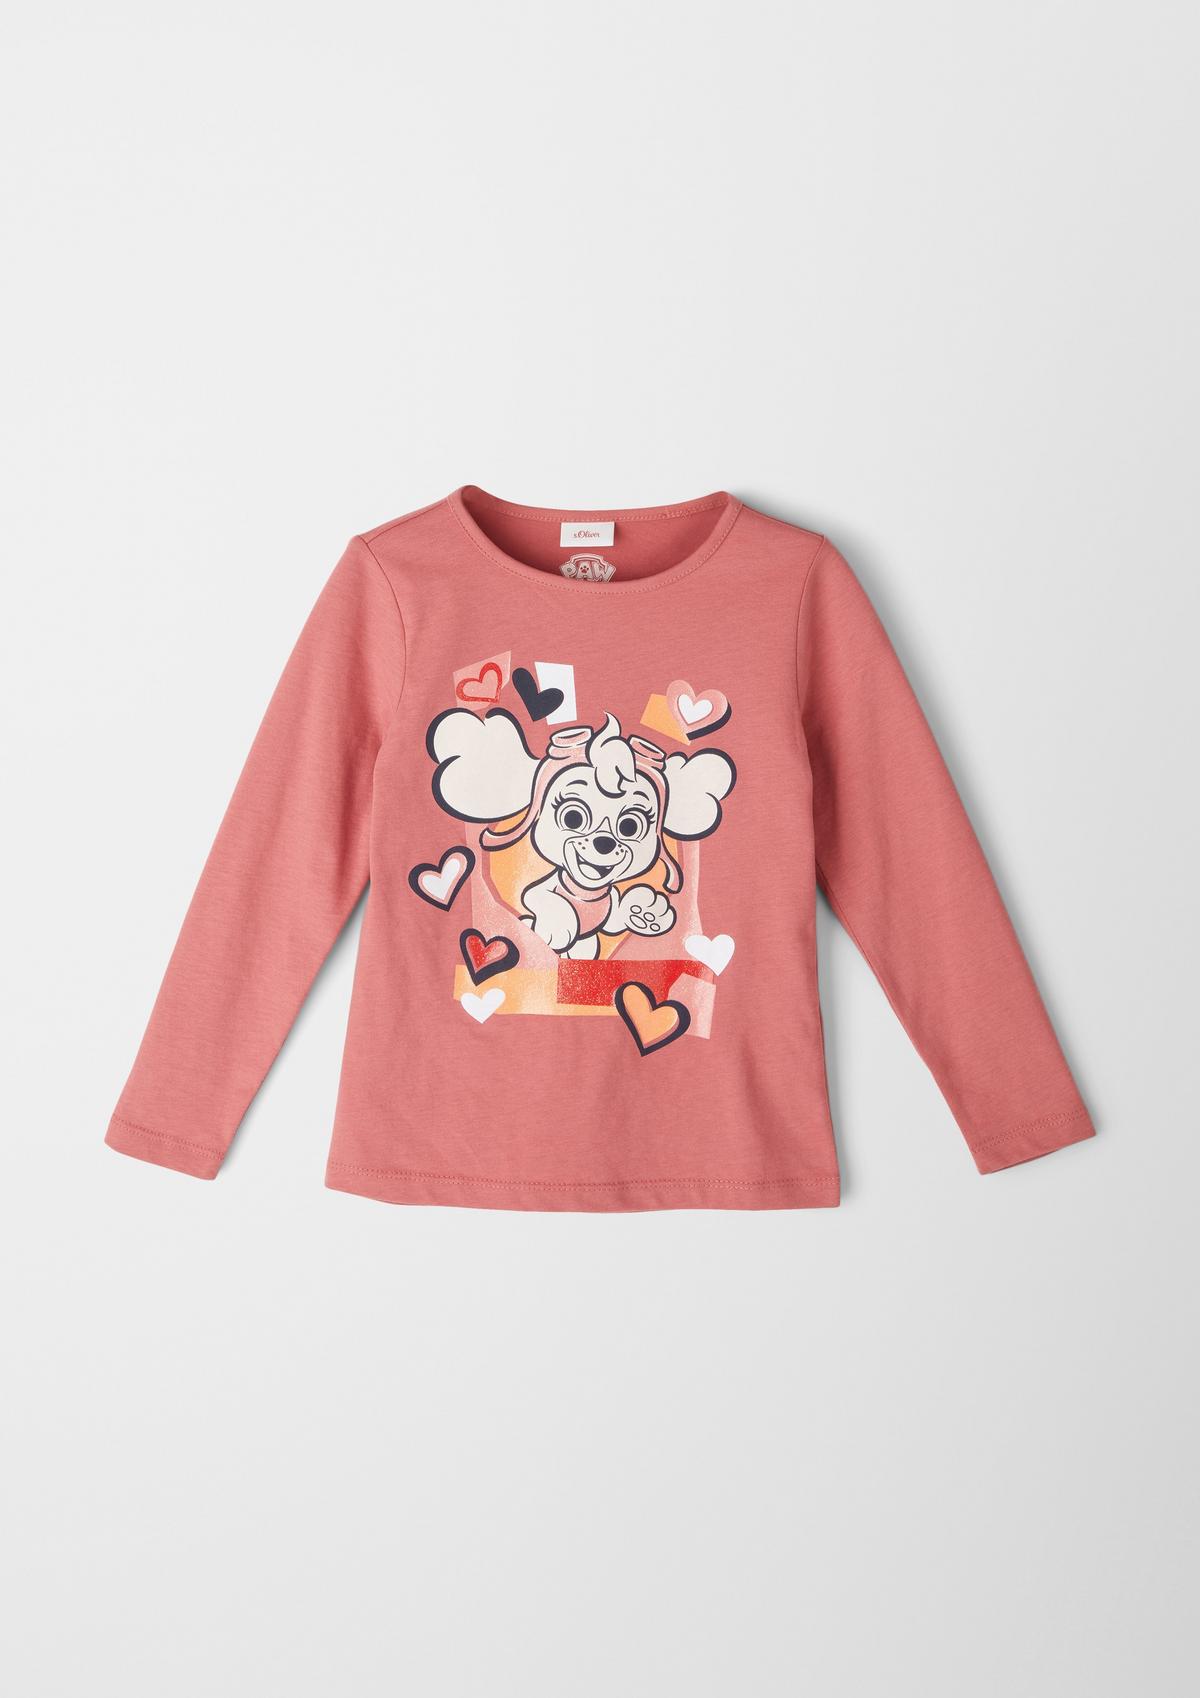 s.Oliver Long sleeve top with a cool Paw Patrol motif print